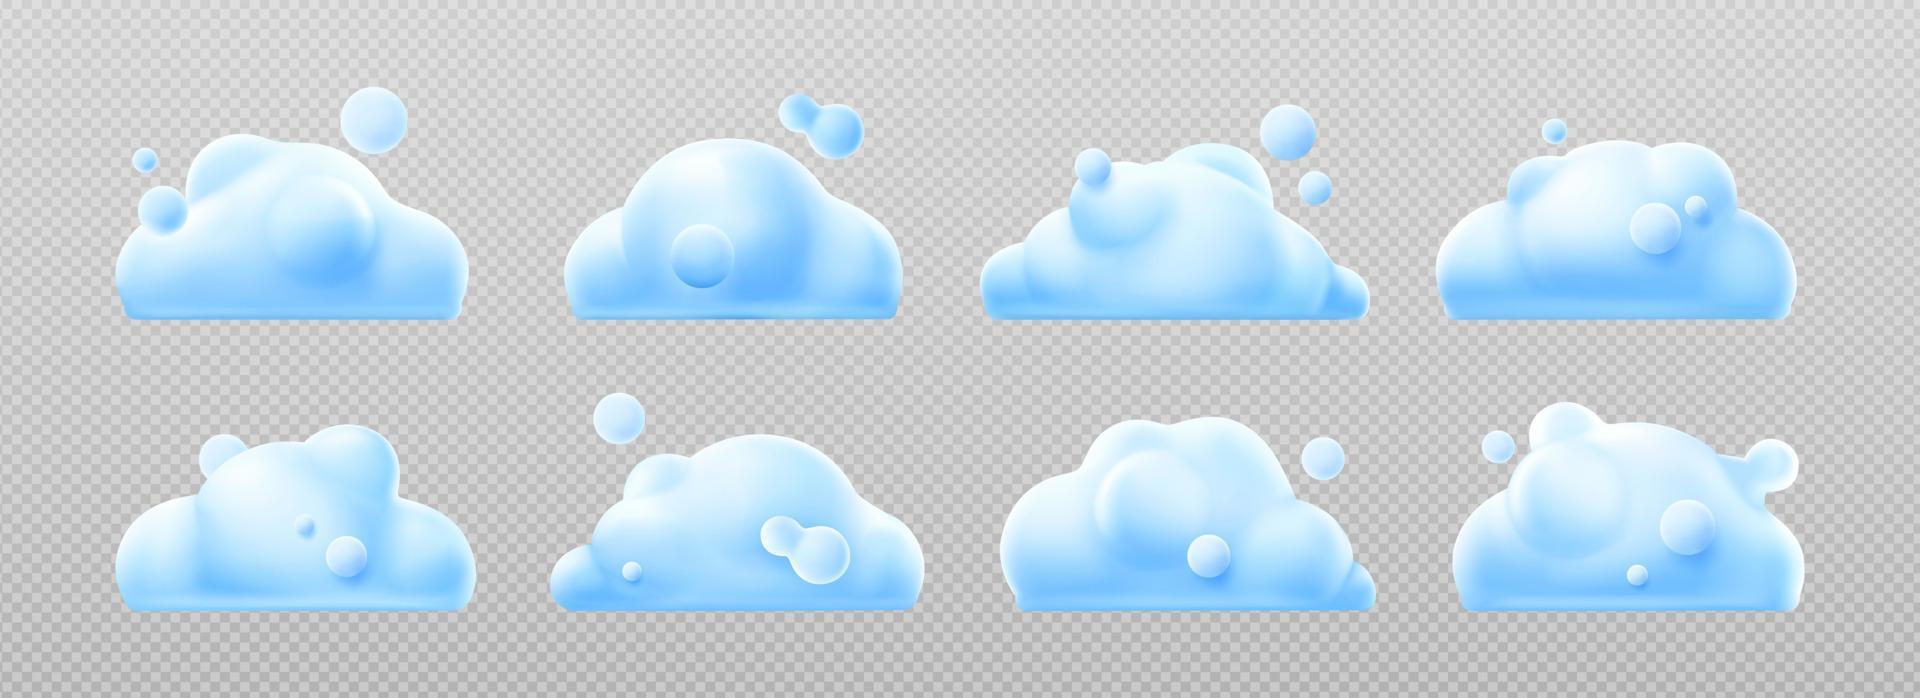 White clouds set isolated on lilac background vector